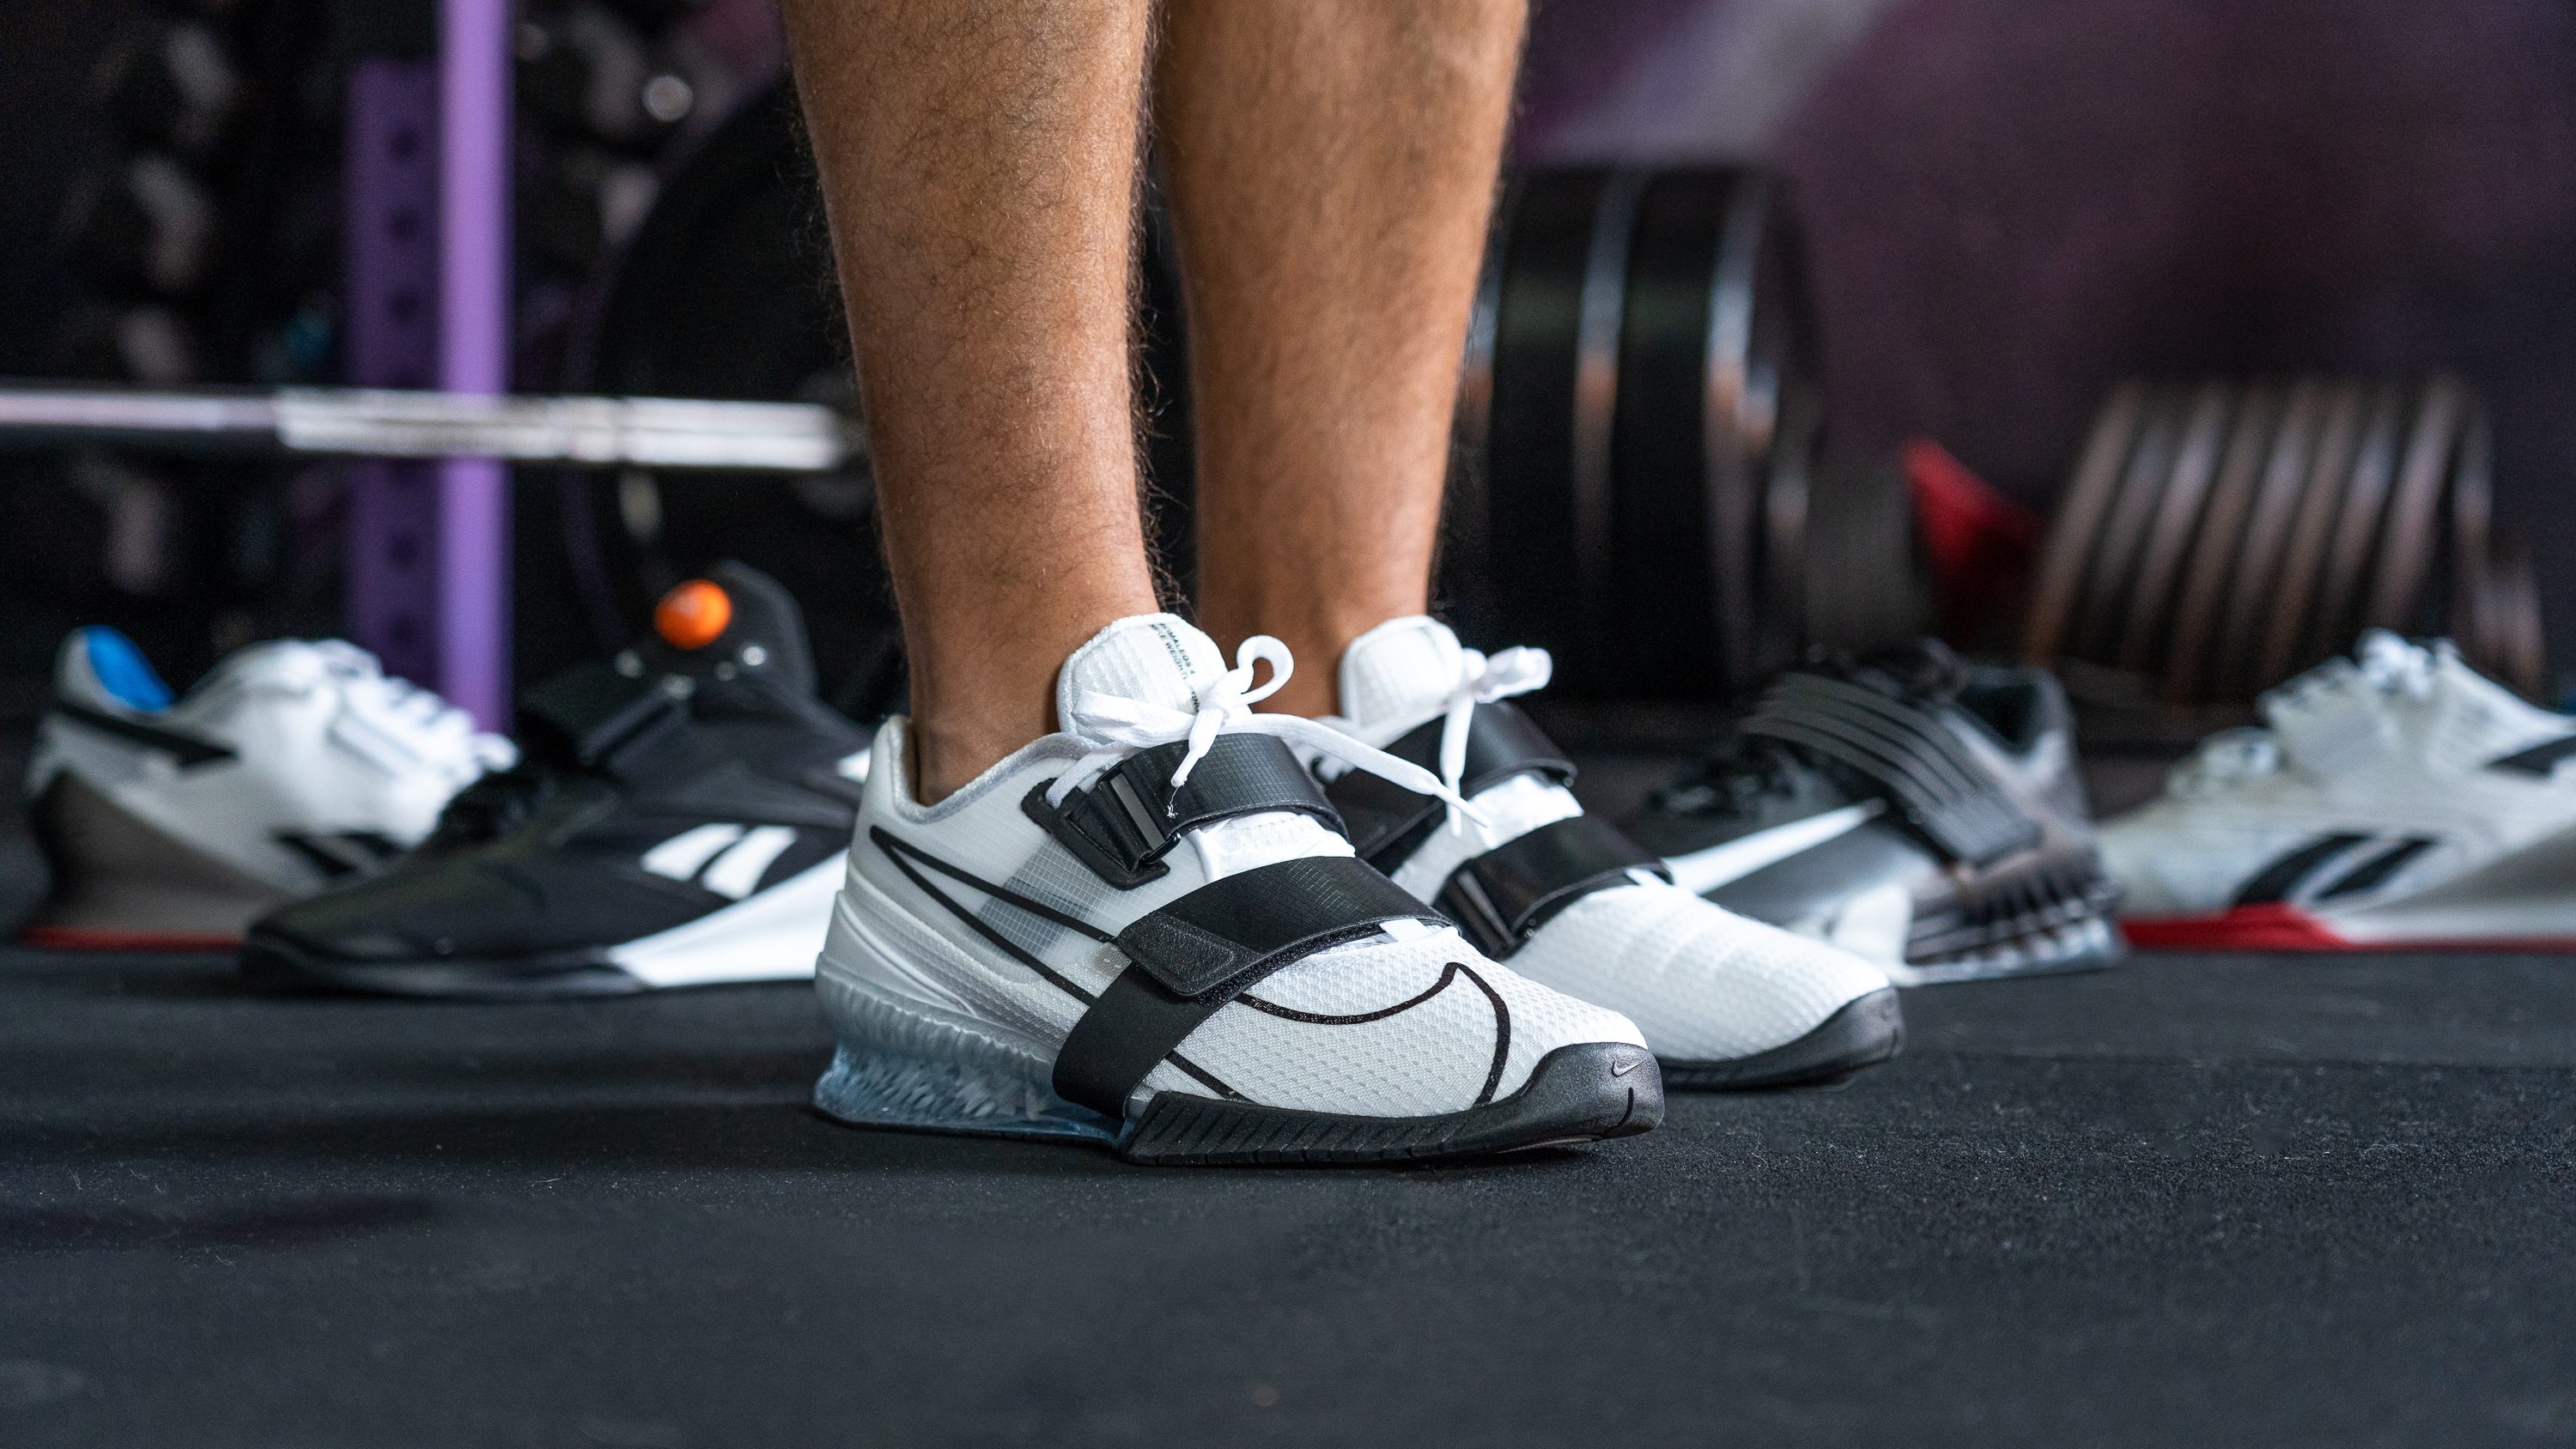 23 Best Weightlifting Shoes 001 15275044 Main 